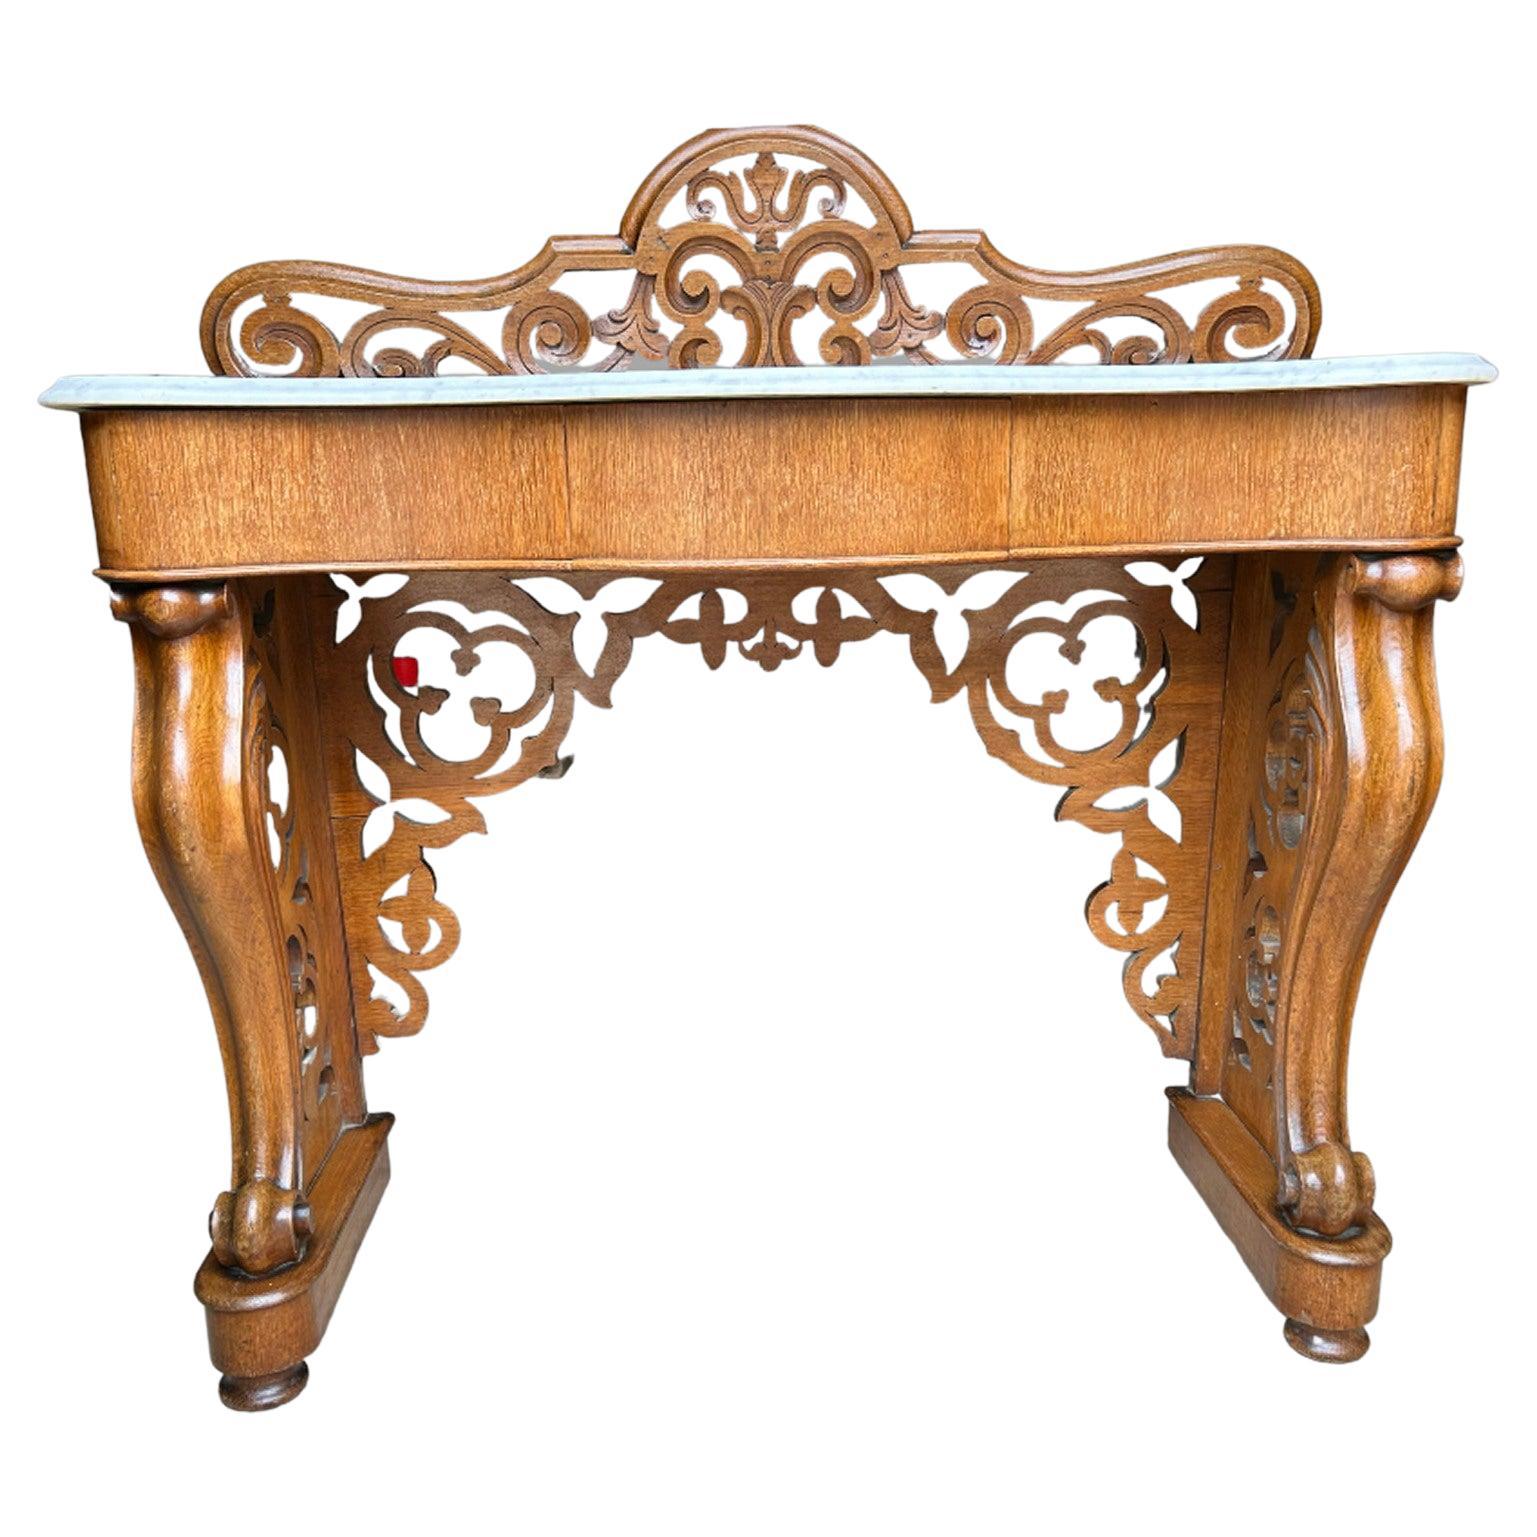 A 19thc Marble Topped Mahogany Console Table